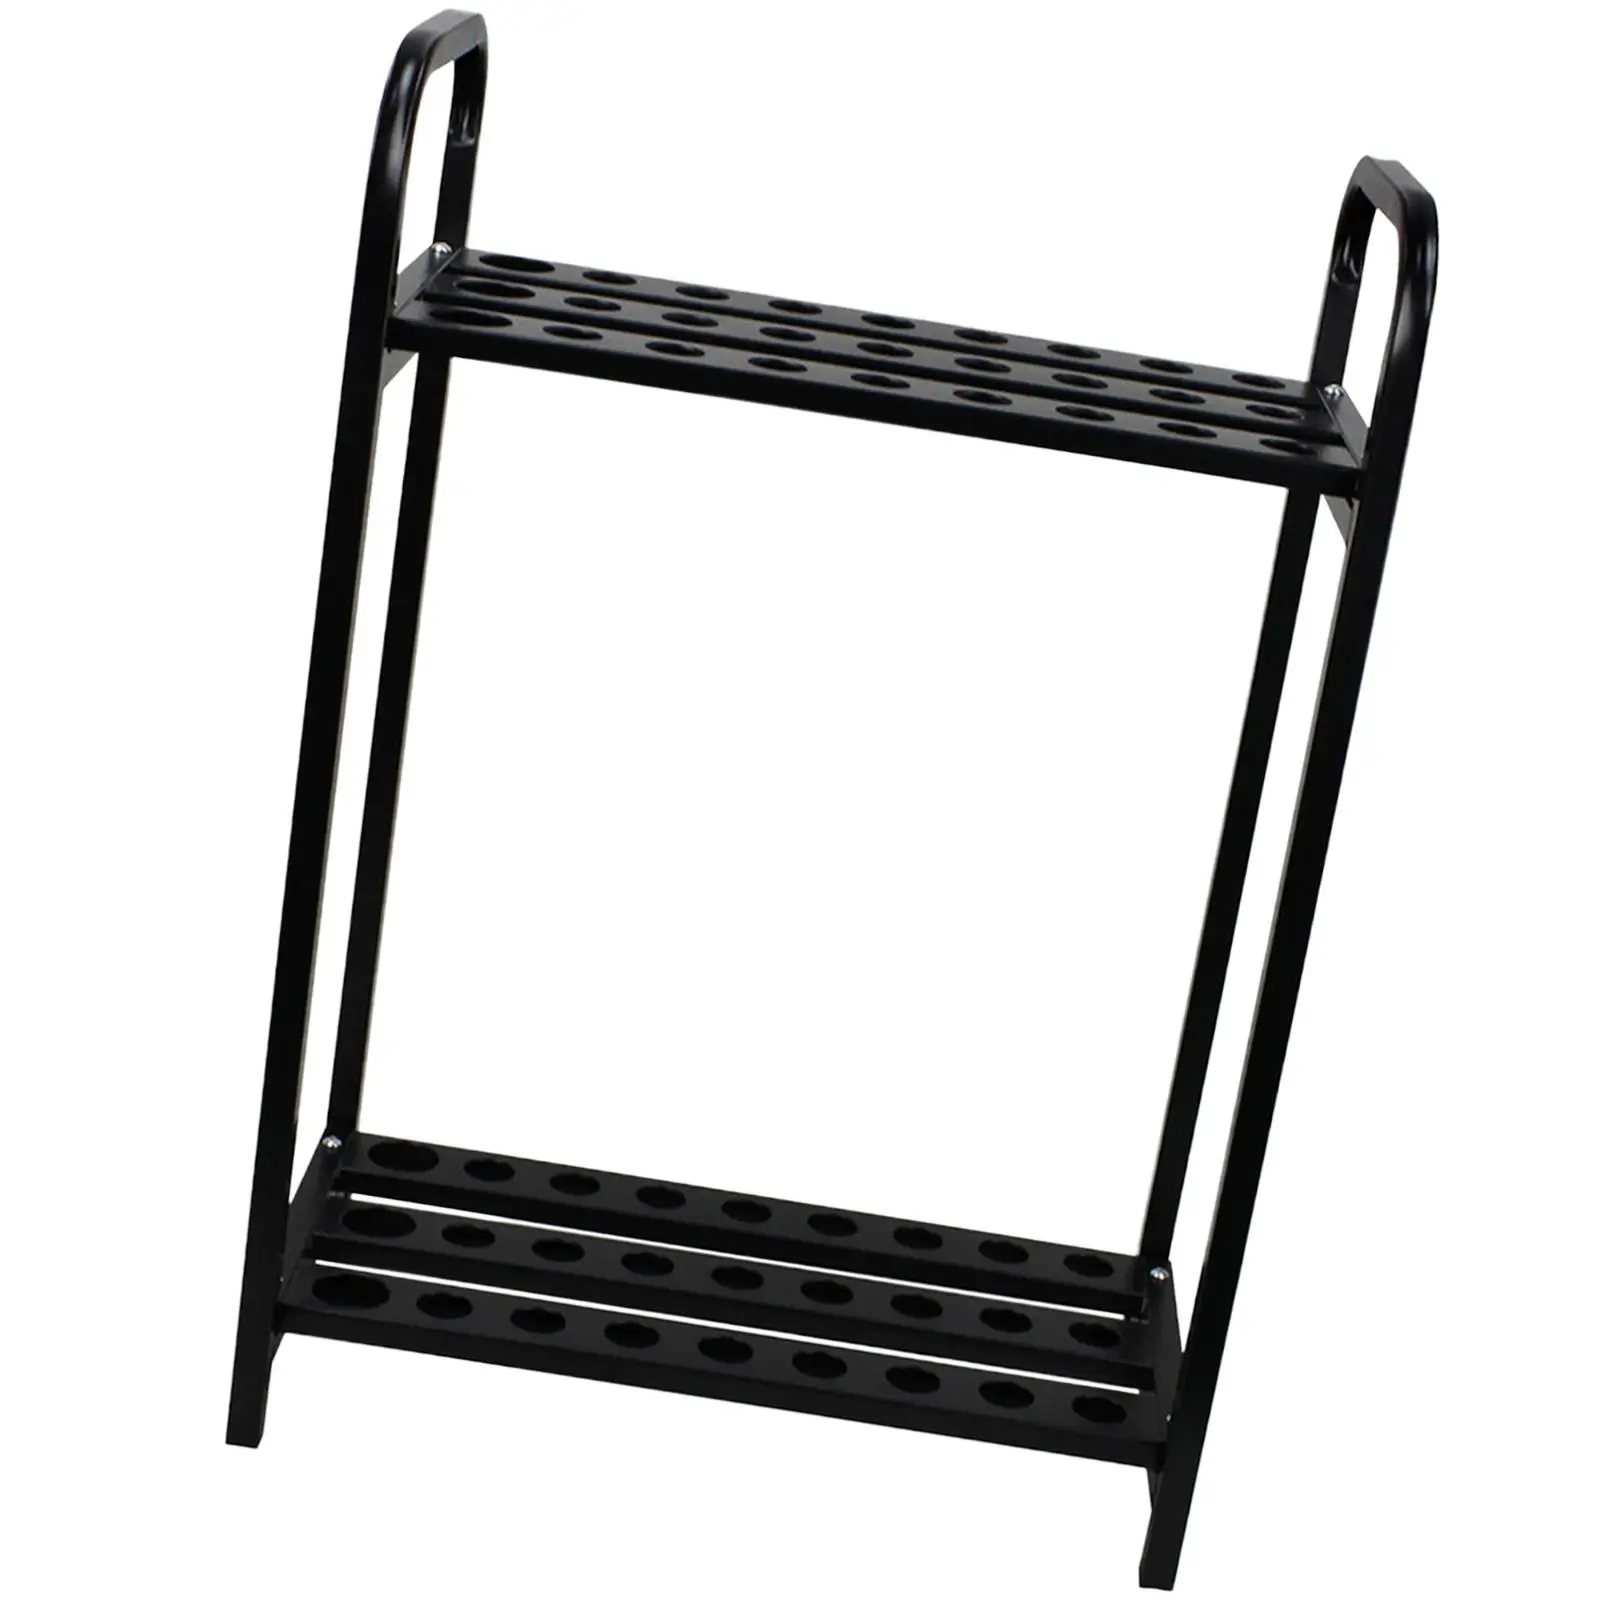 Portable Golf Club Holder Stand, 27 Holes Accessories, Floor Stand, Golf Club Rack, for Basement Indoor Storage Display